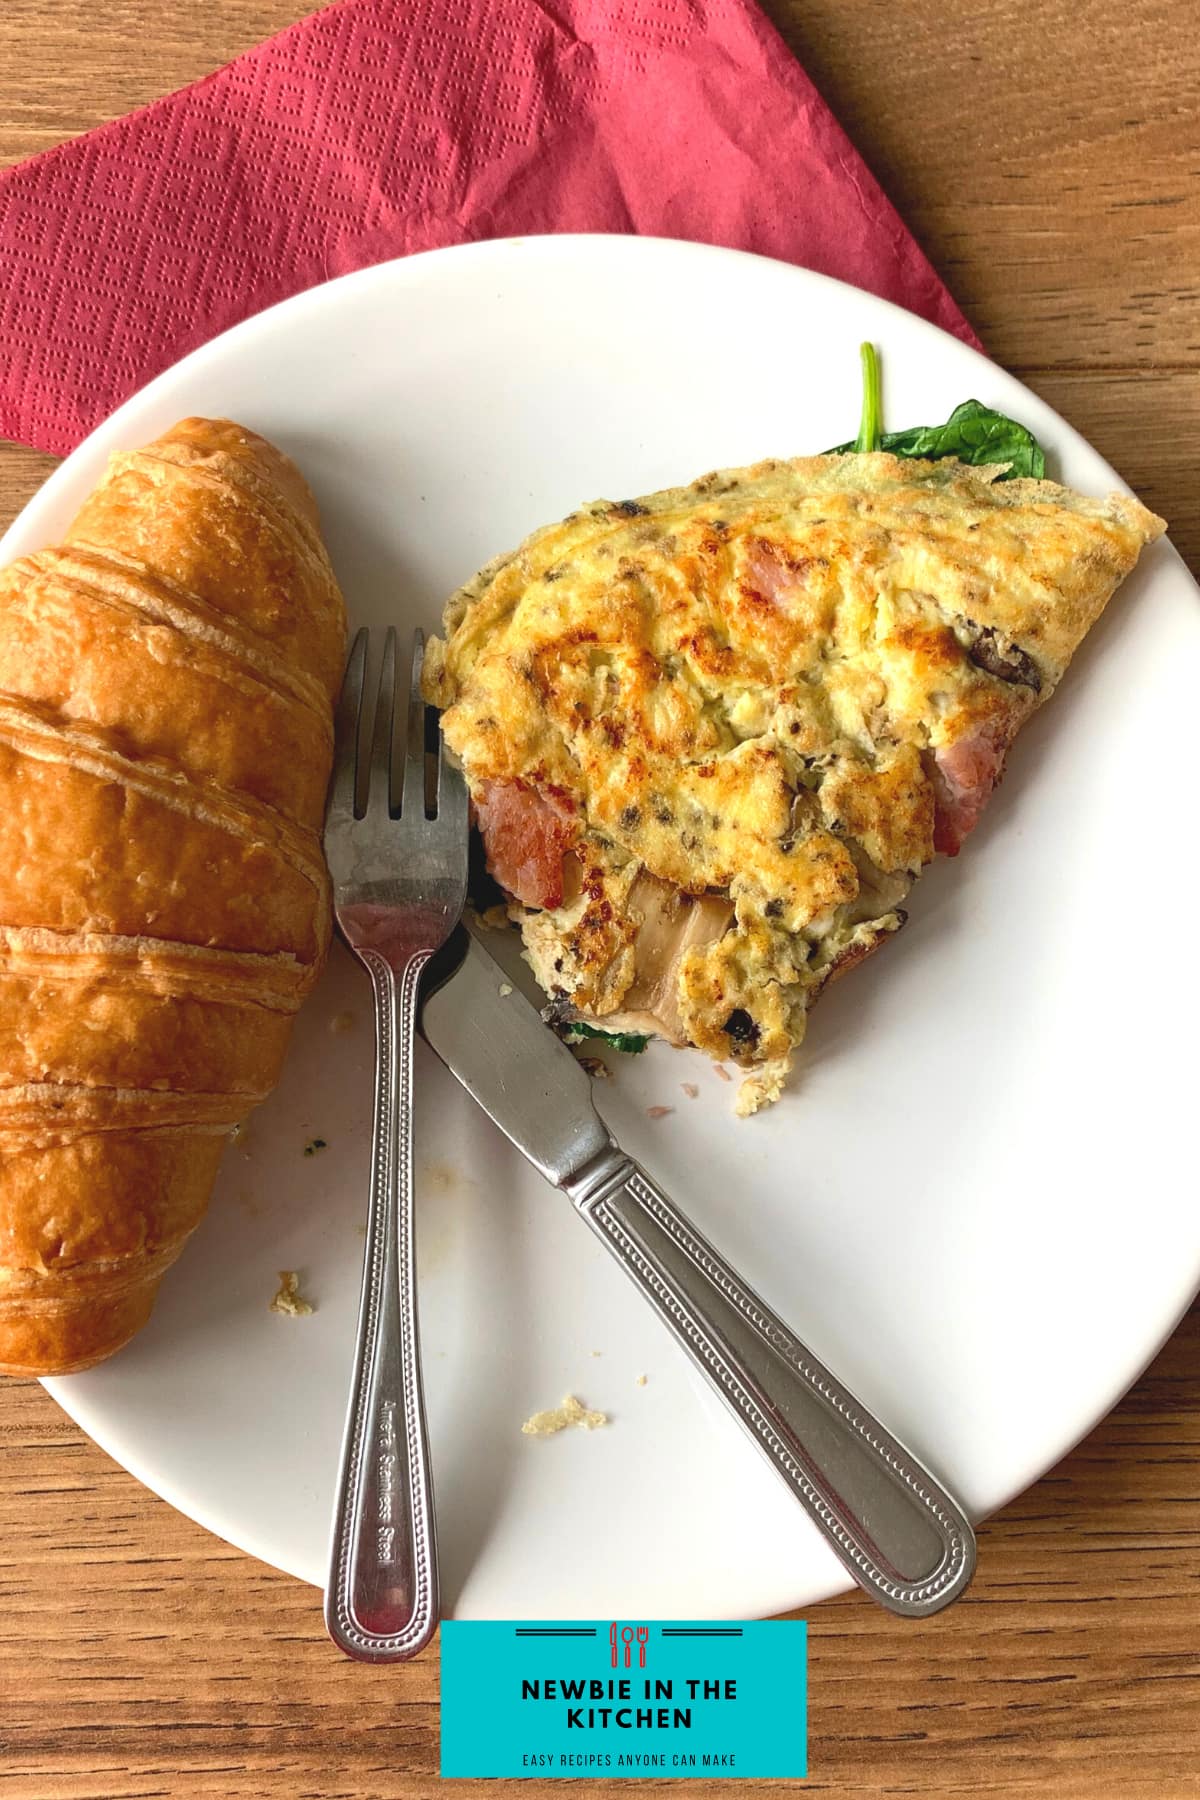 How To Make An Omelette. A simple easy recipe for how to make a basic French omelette. Loaded with bacon, cheese, mushrooms and spinach, this is a great all round breakfast, brunch or supper meal.